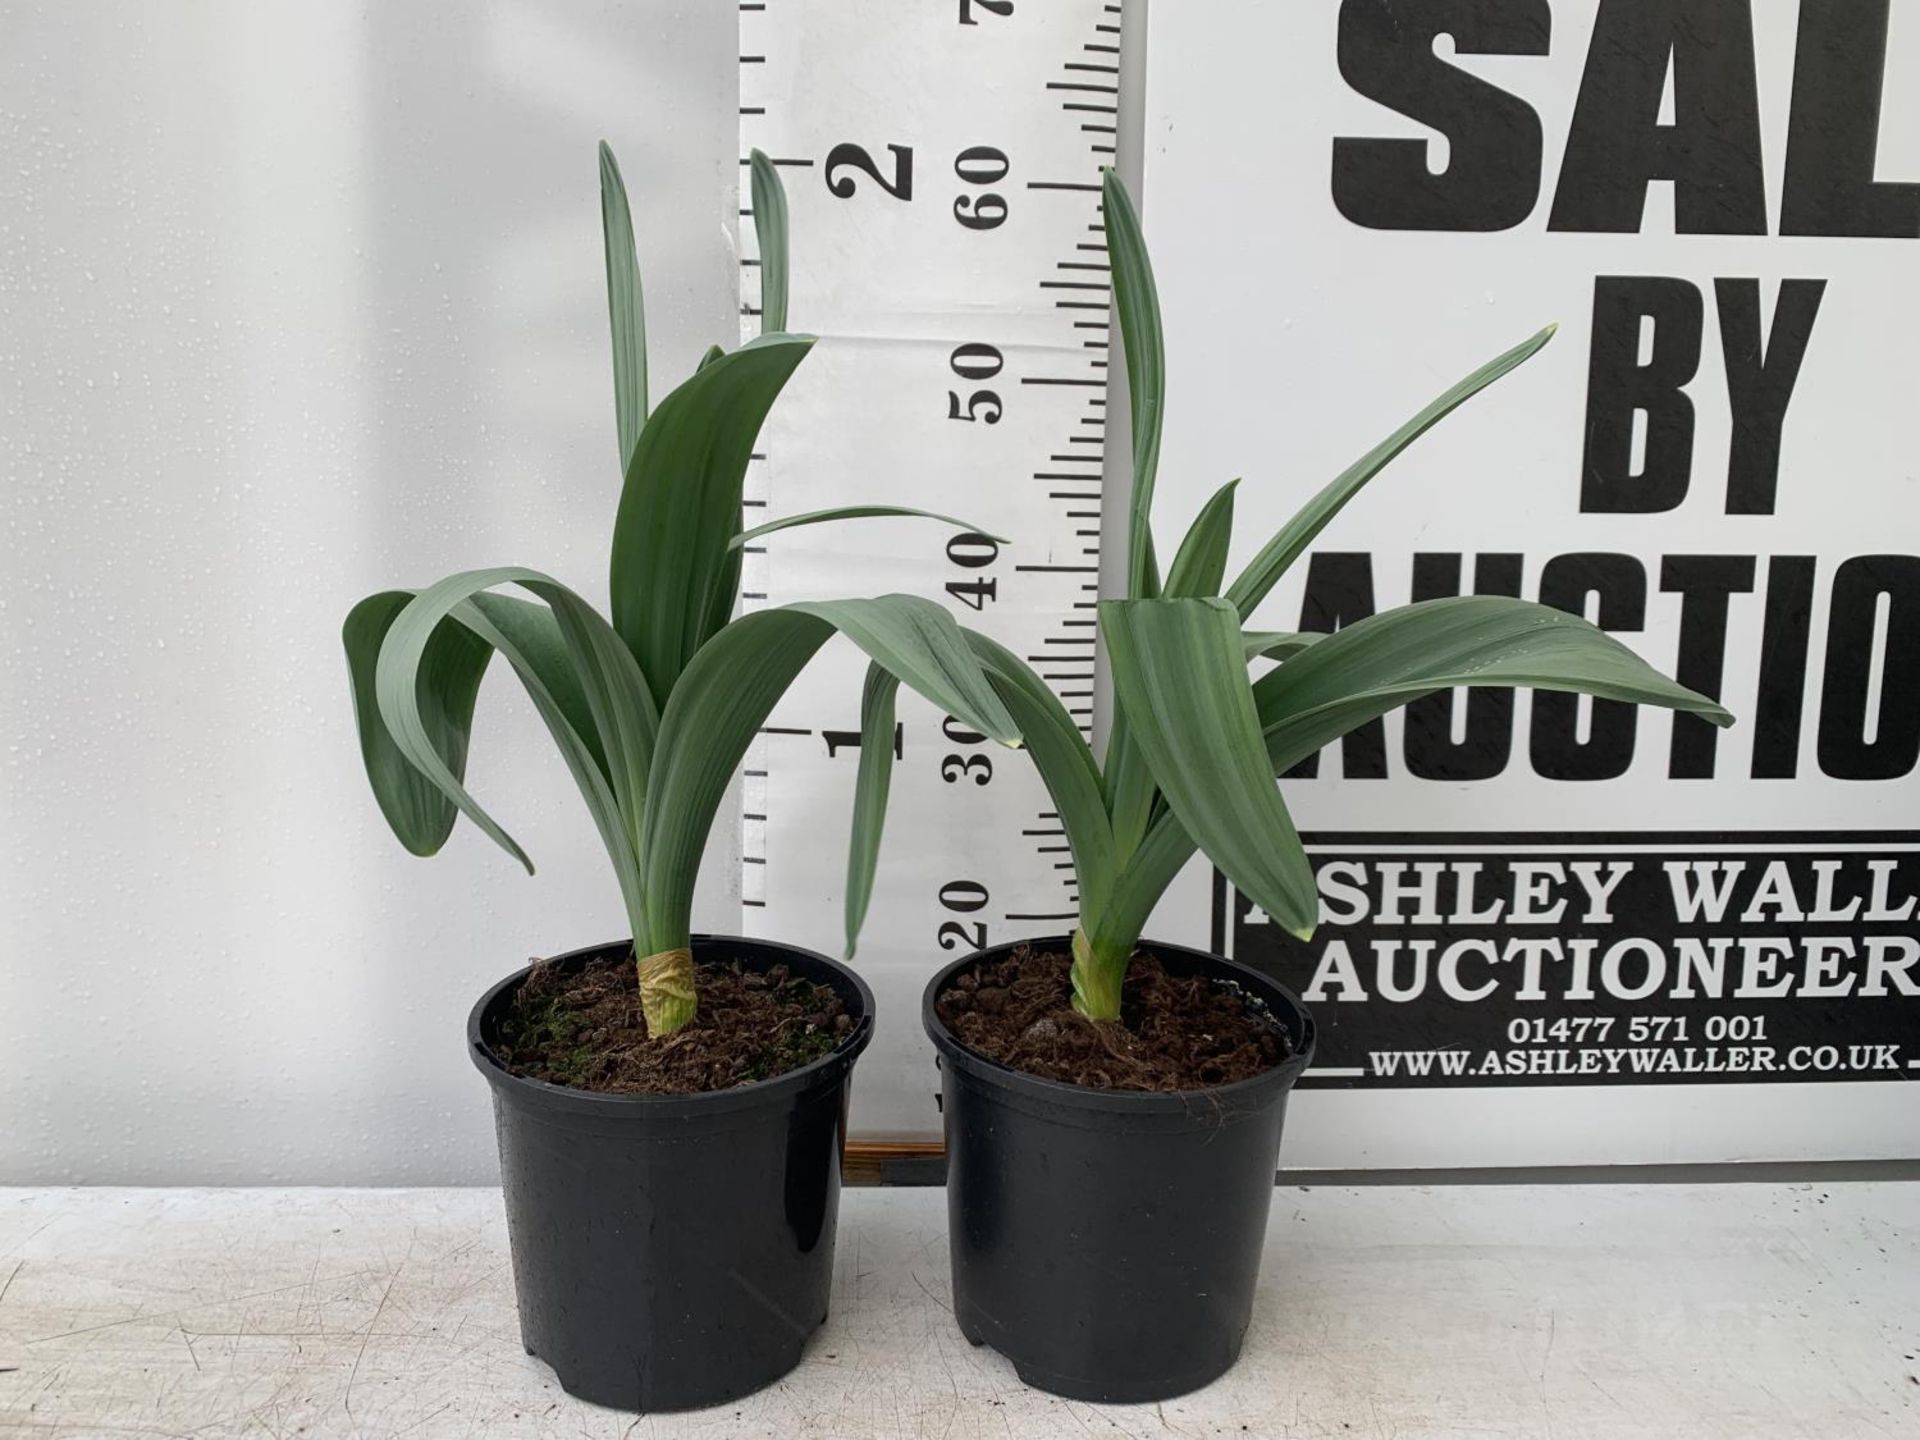 TWO ALLIUMS 'MOUNT EVEREST' IN A 3 LTR POT APPROX 60CM IN HEIGHT PLUS VAT TO BE SOLD FOR THE TWO - Image 2 of 5